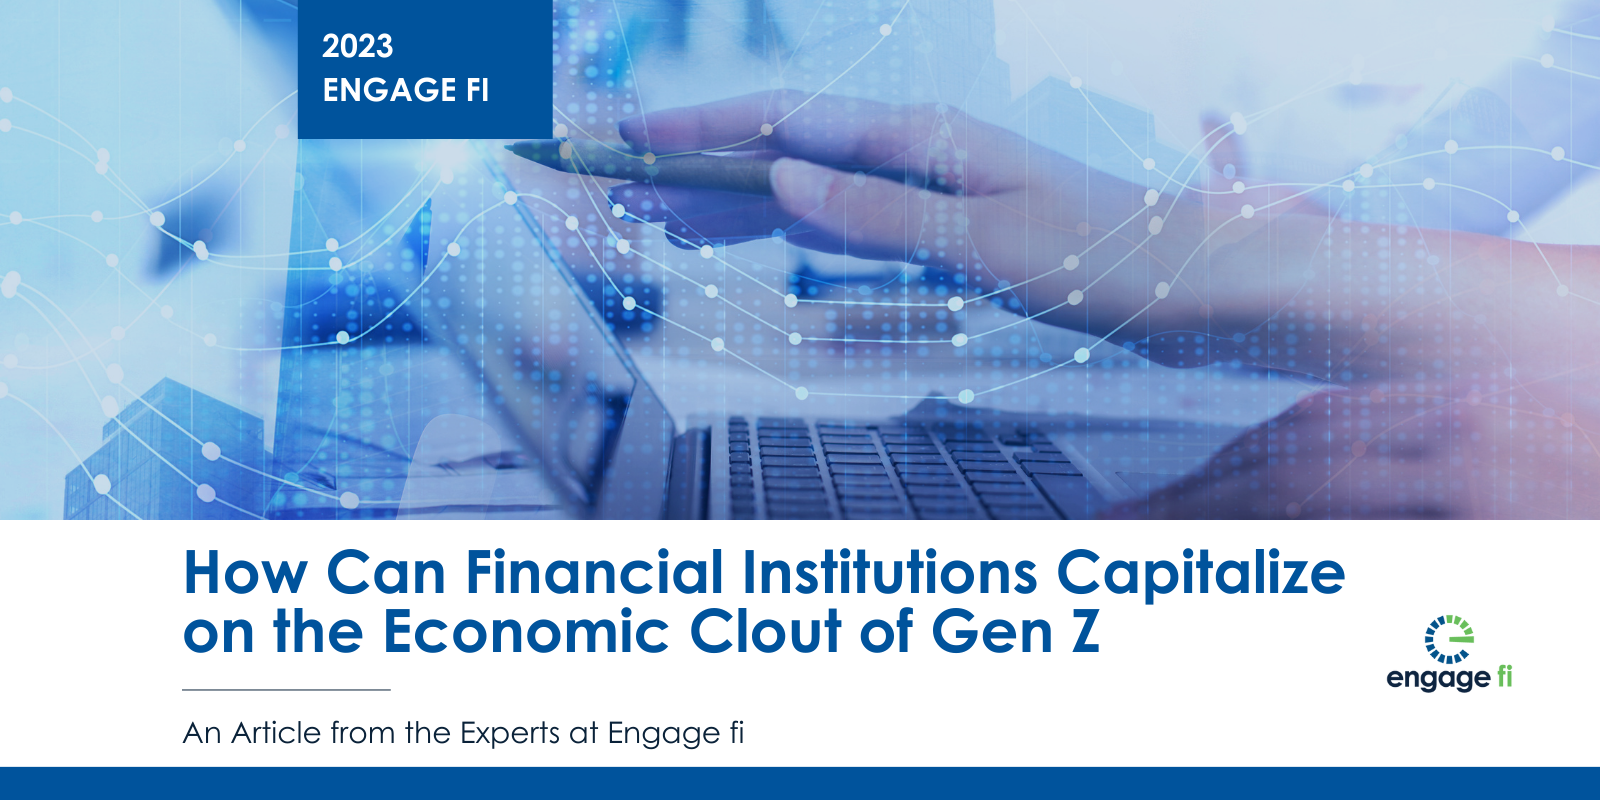 How Can Financial Institutions Capitalize on the Economic Clout of Generation Z?